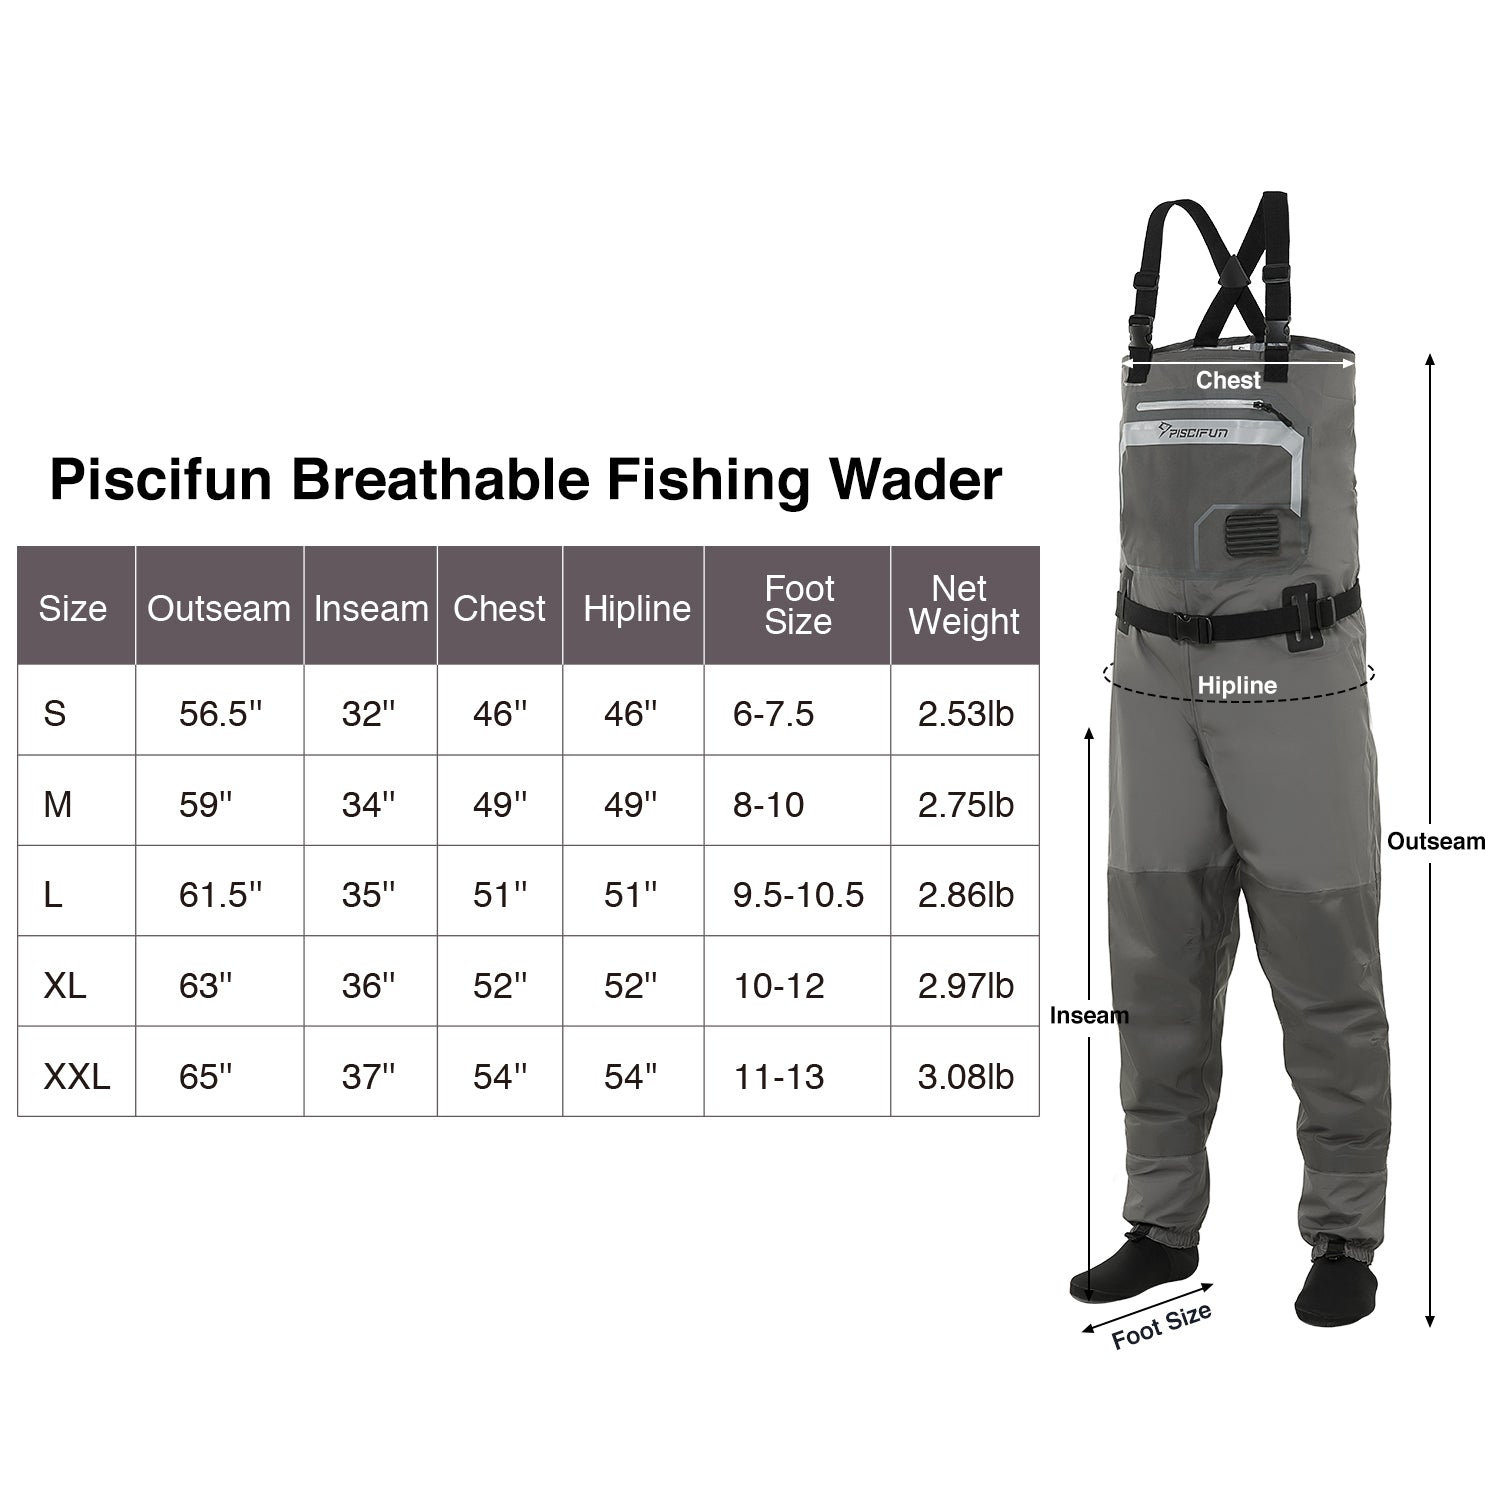 Piscifun® Breathable Chest Waders Stocking Foot Waders Fishing